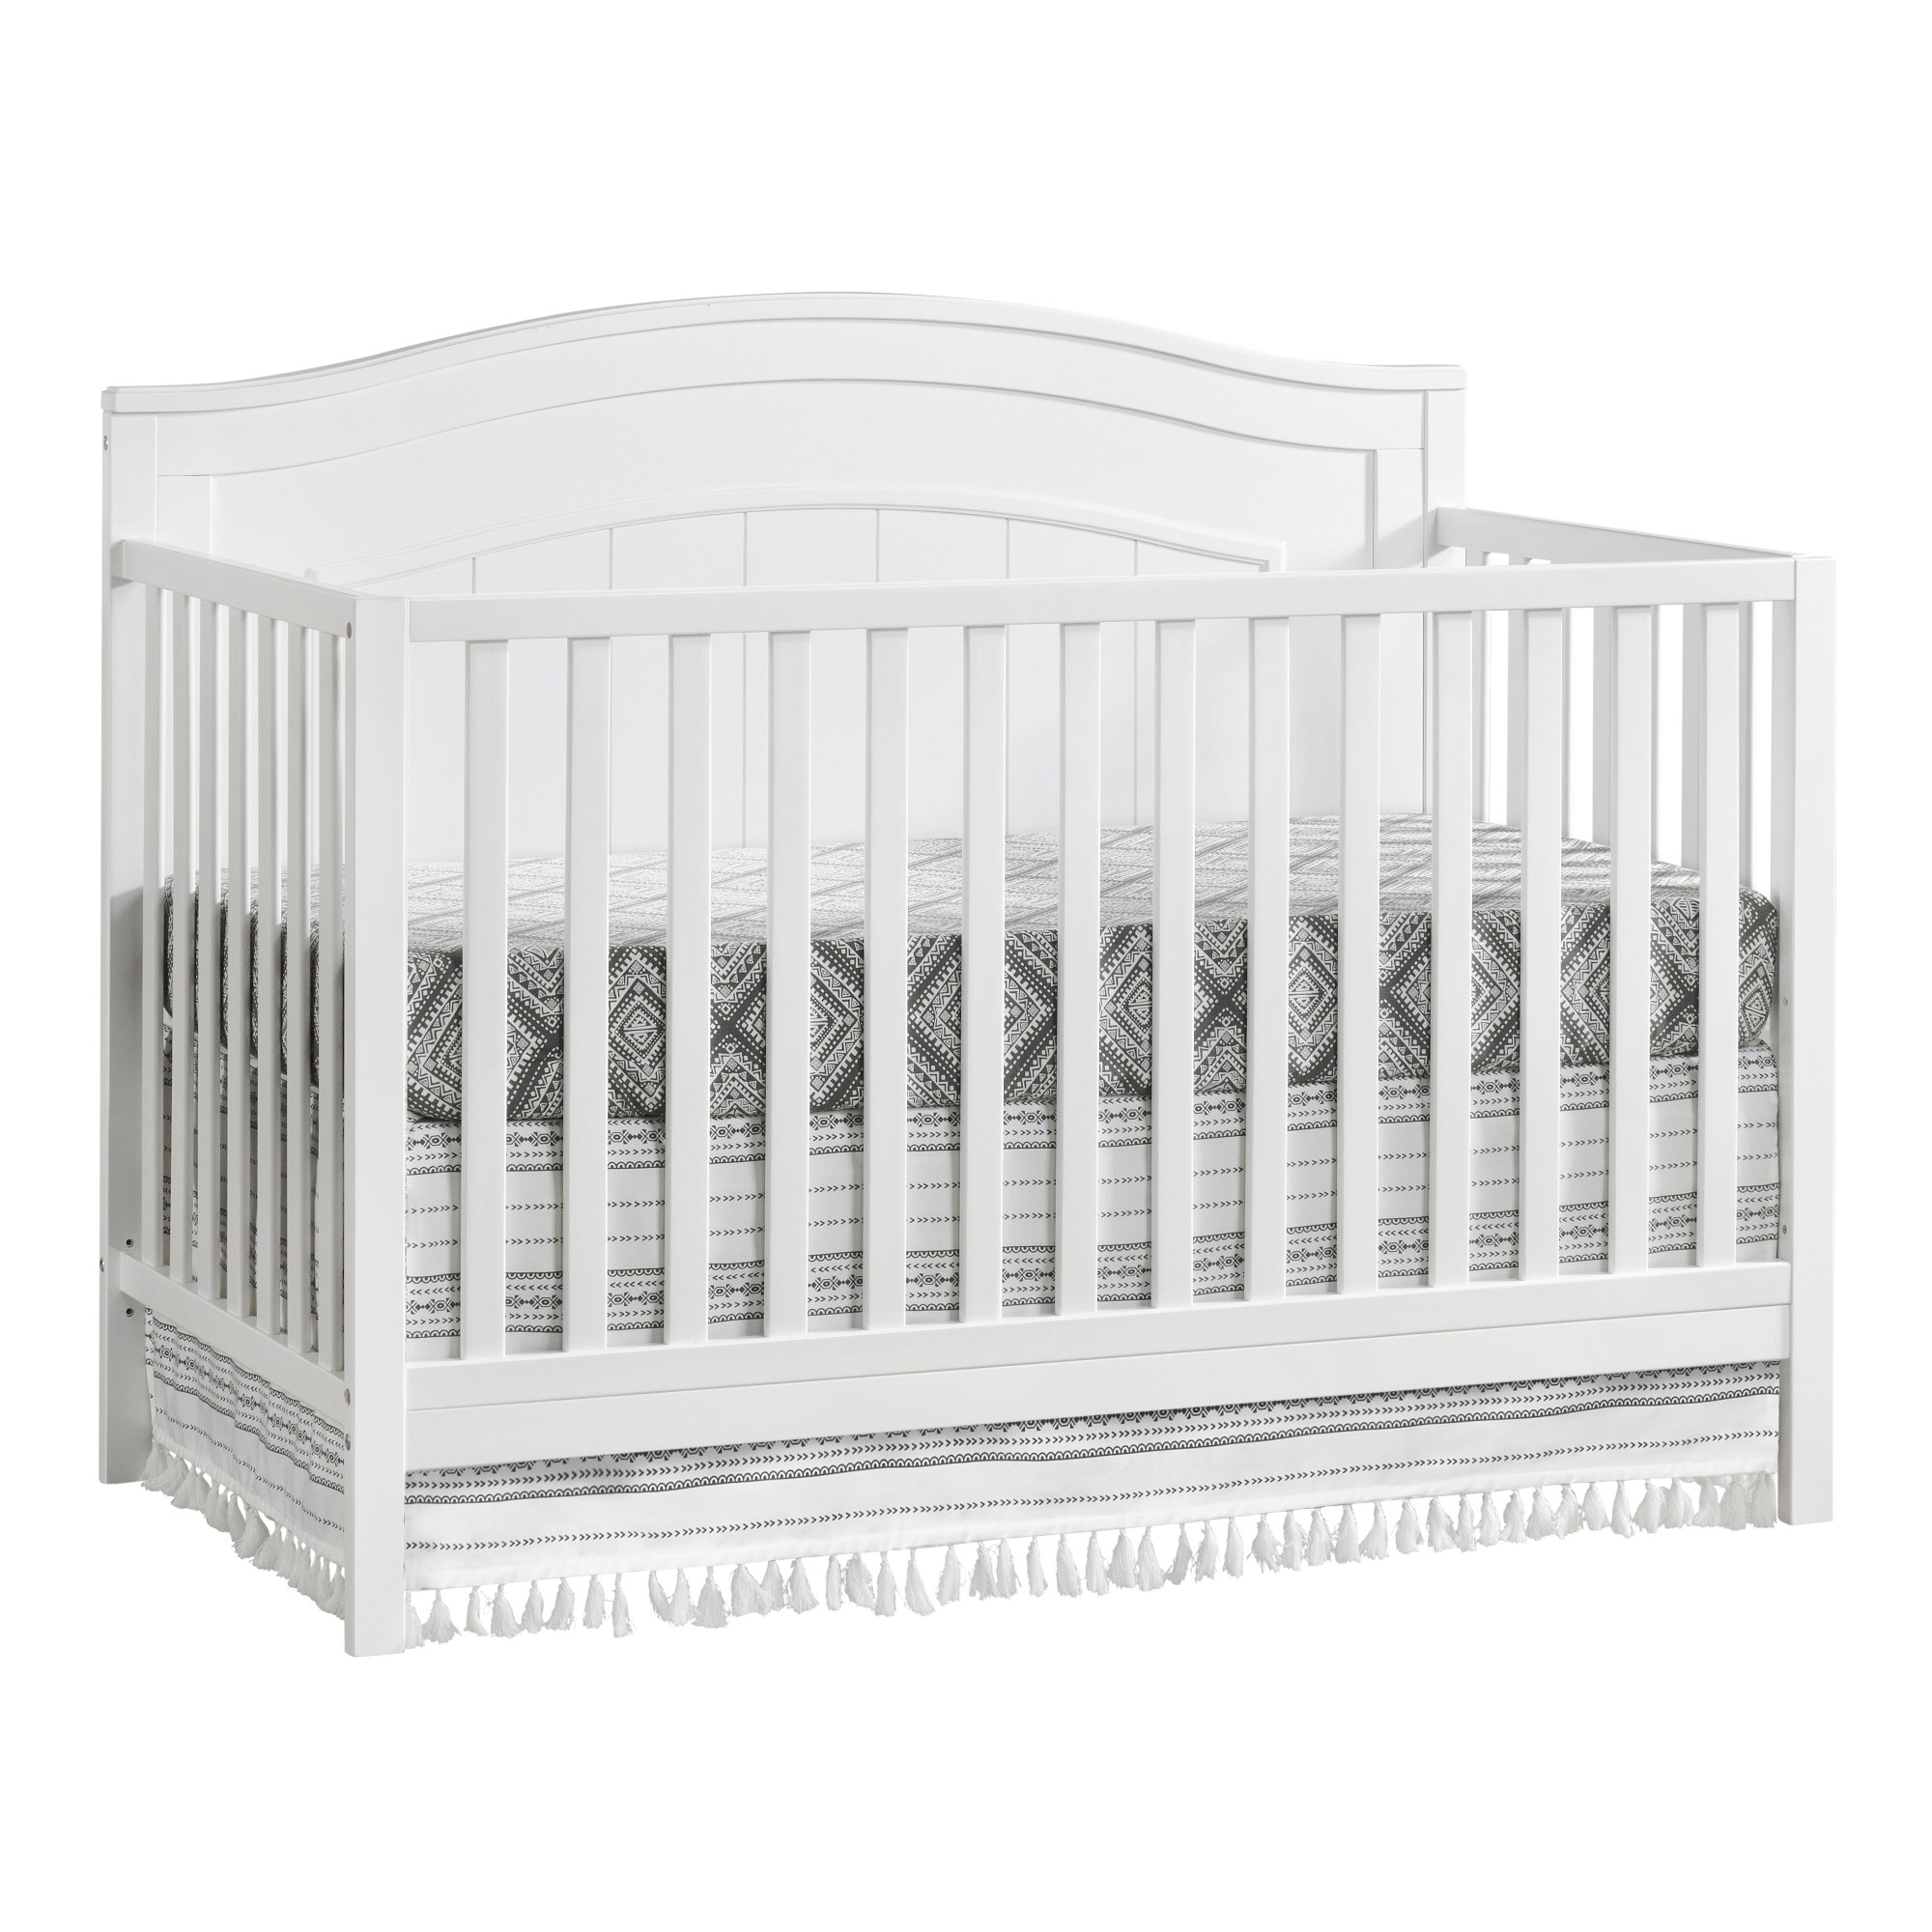 Oxford Baby North Bay 4-in-1 Convertible Crib, Snow White, GREENGUARD Gold Certified, Wooden Crib - image 1 of 4